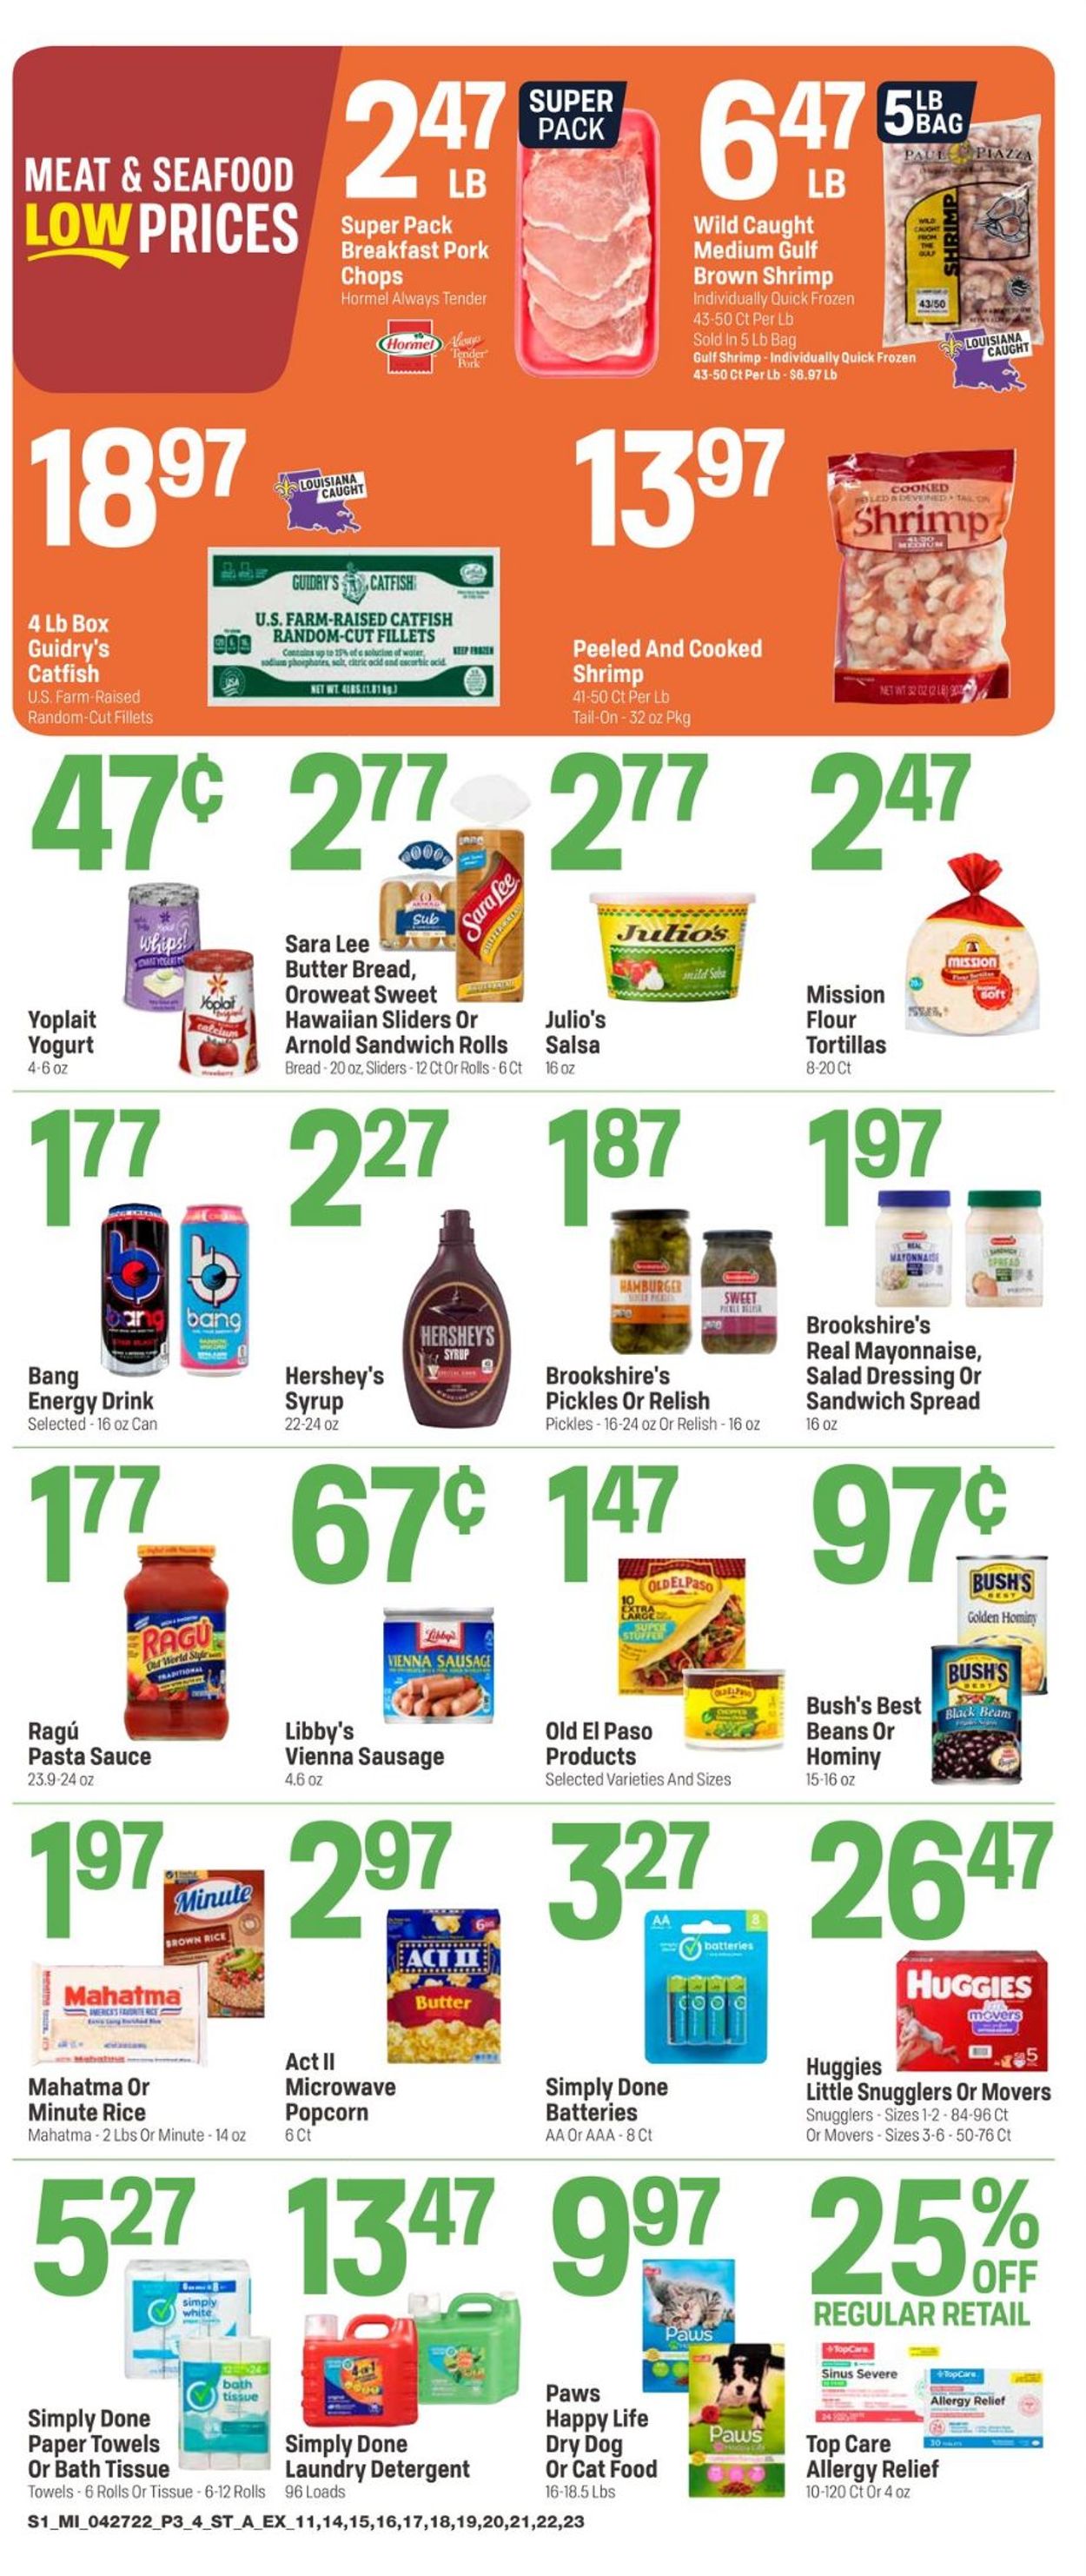 Catalogue Super 1 Foods from 04/27/2022